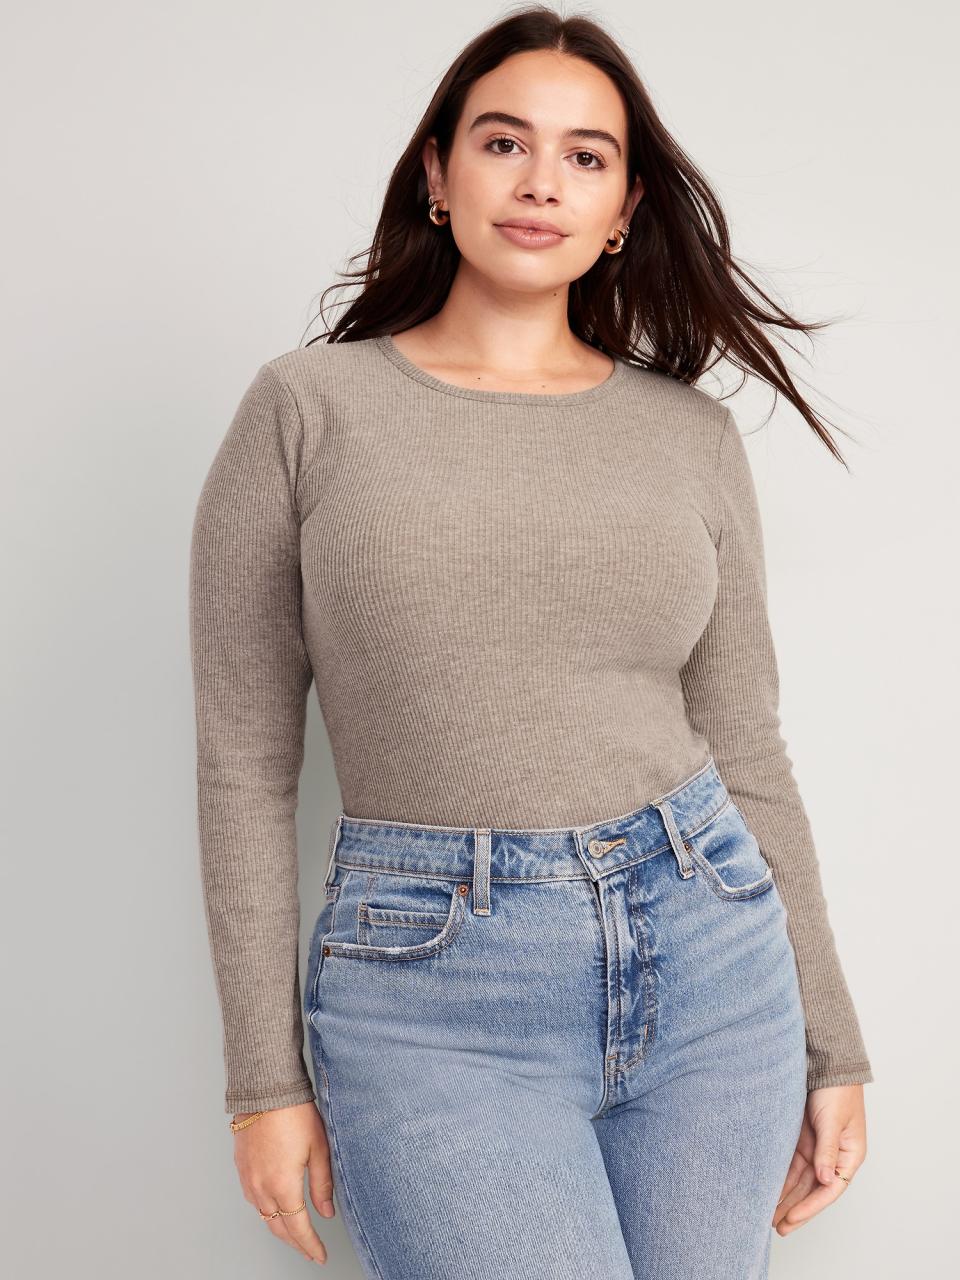 someone wearing the Plush Long-Sleeve Crew-Neck T-Shirt with jeans